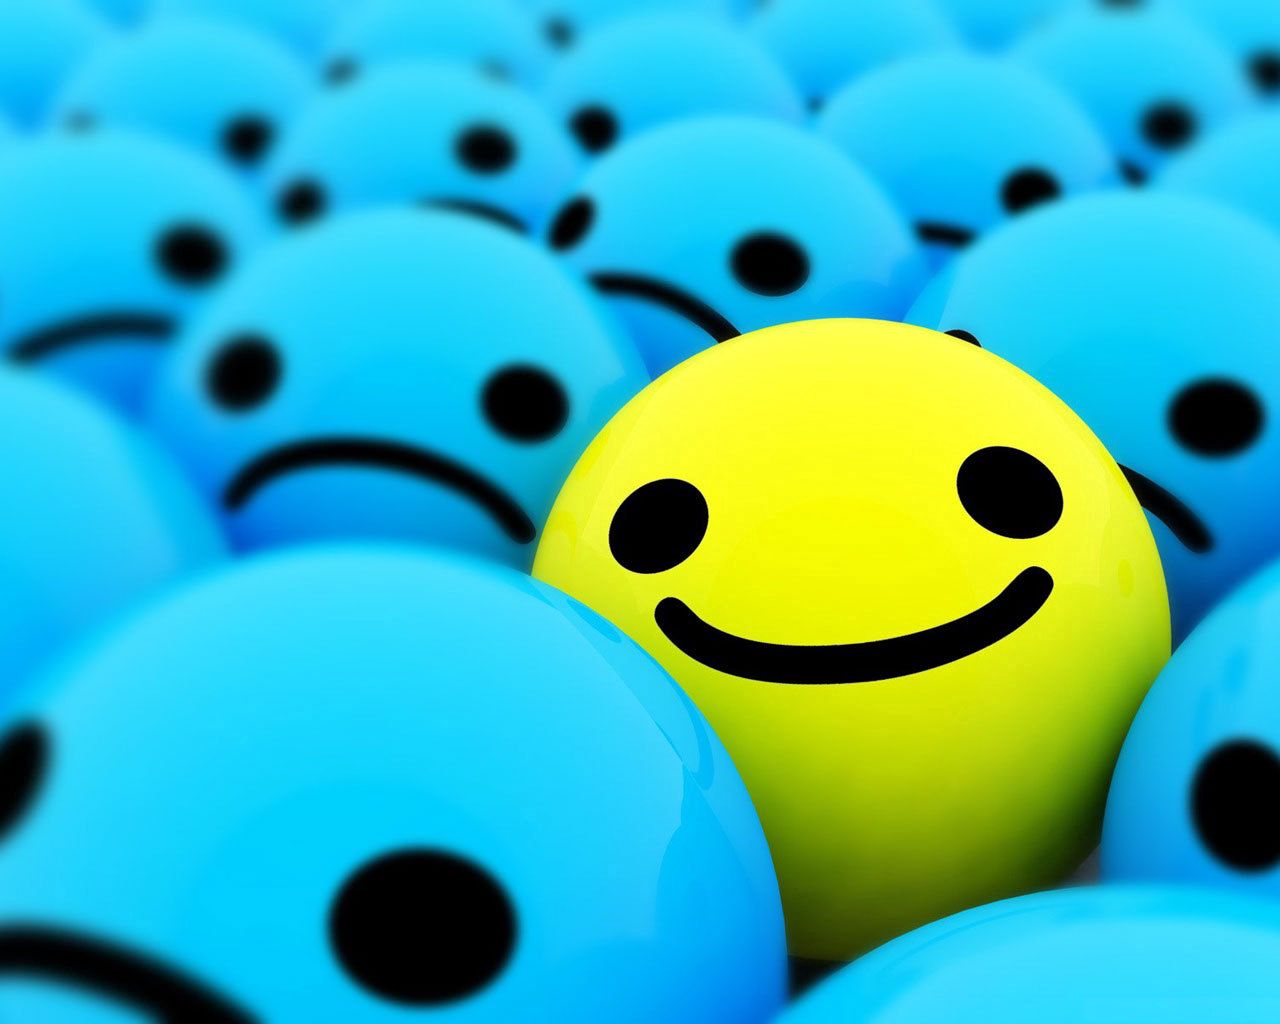 bright, yellow, smile, abstract, blue iphone wallpaper